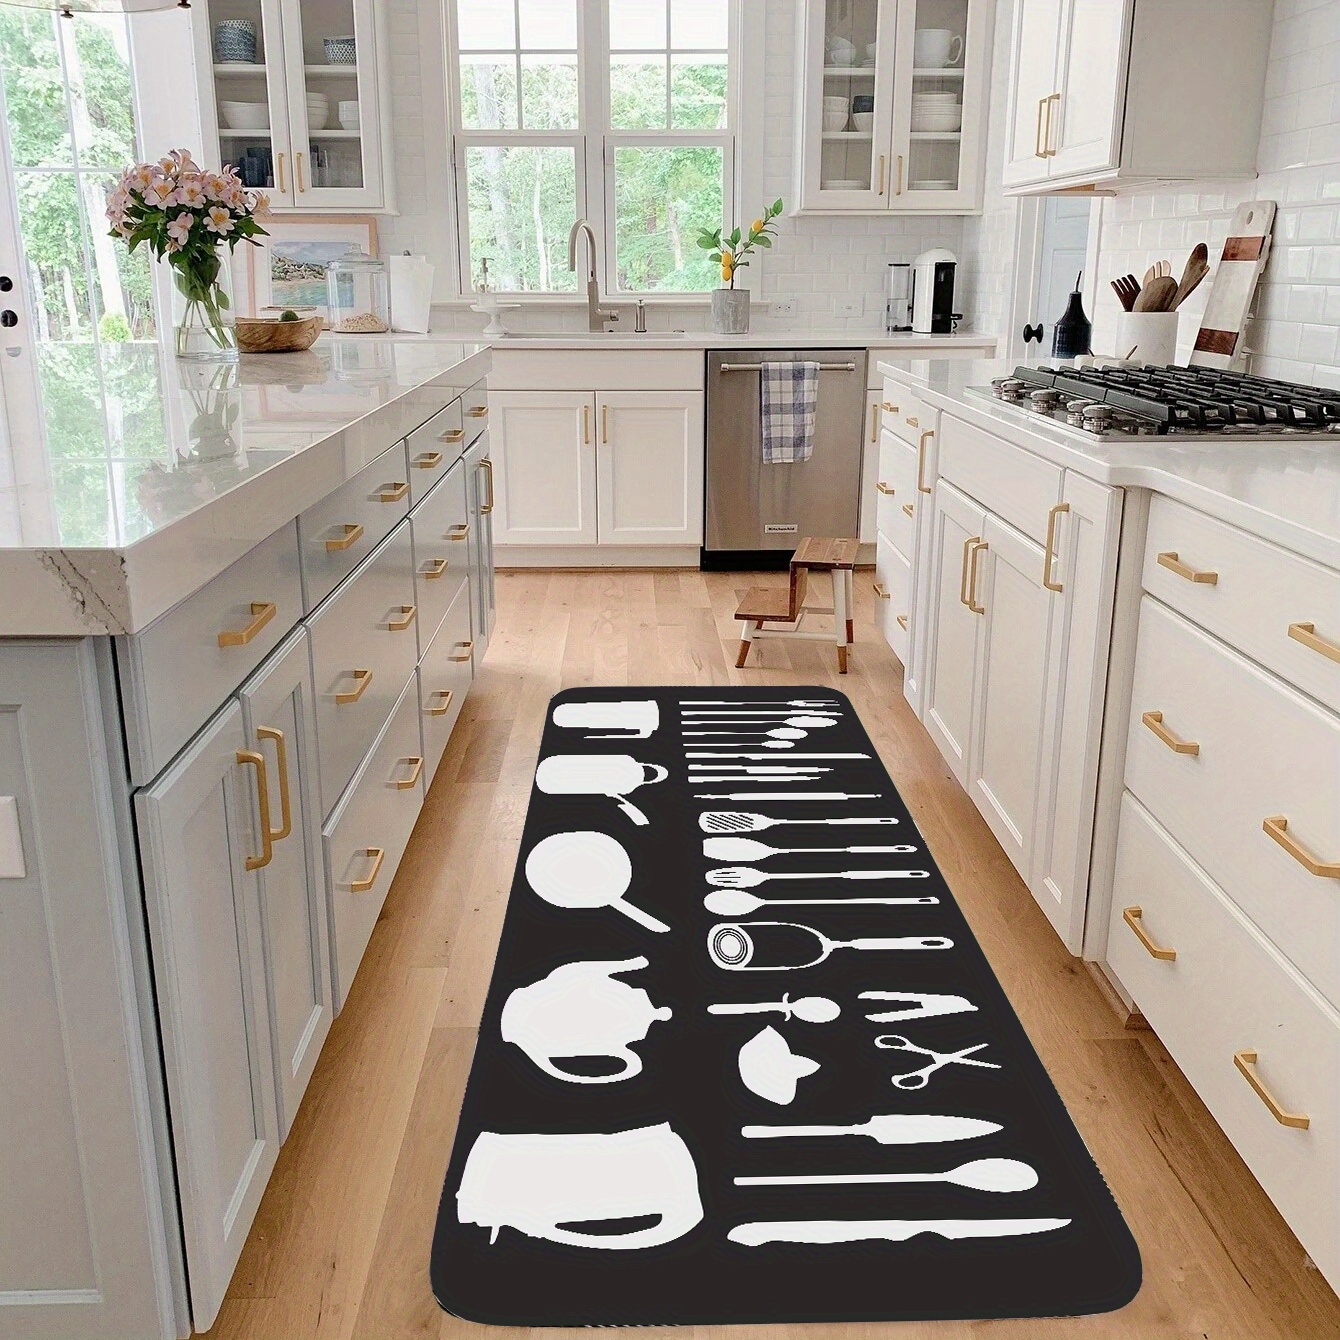 1pc Kitchen Oil-proof Printed Cutting Mat, Waterproof Non-slip